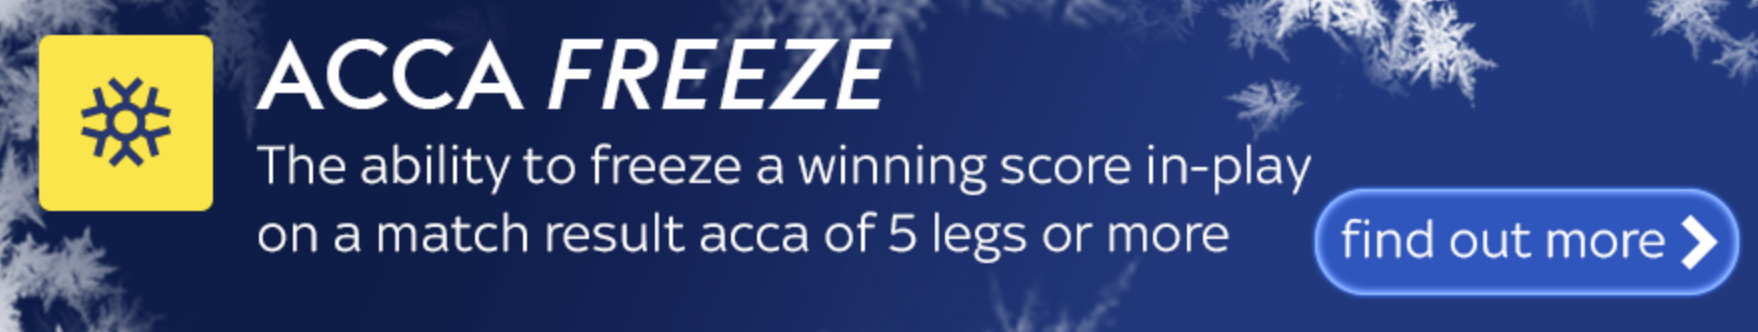 SkyBet Acca Freeze Betting Promotion